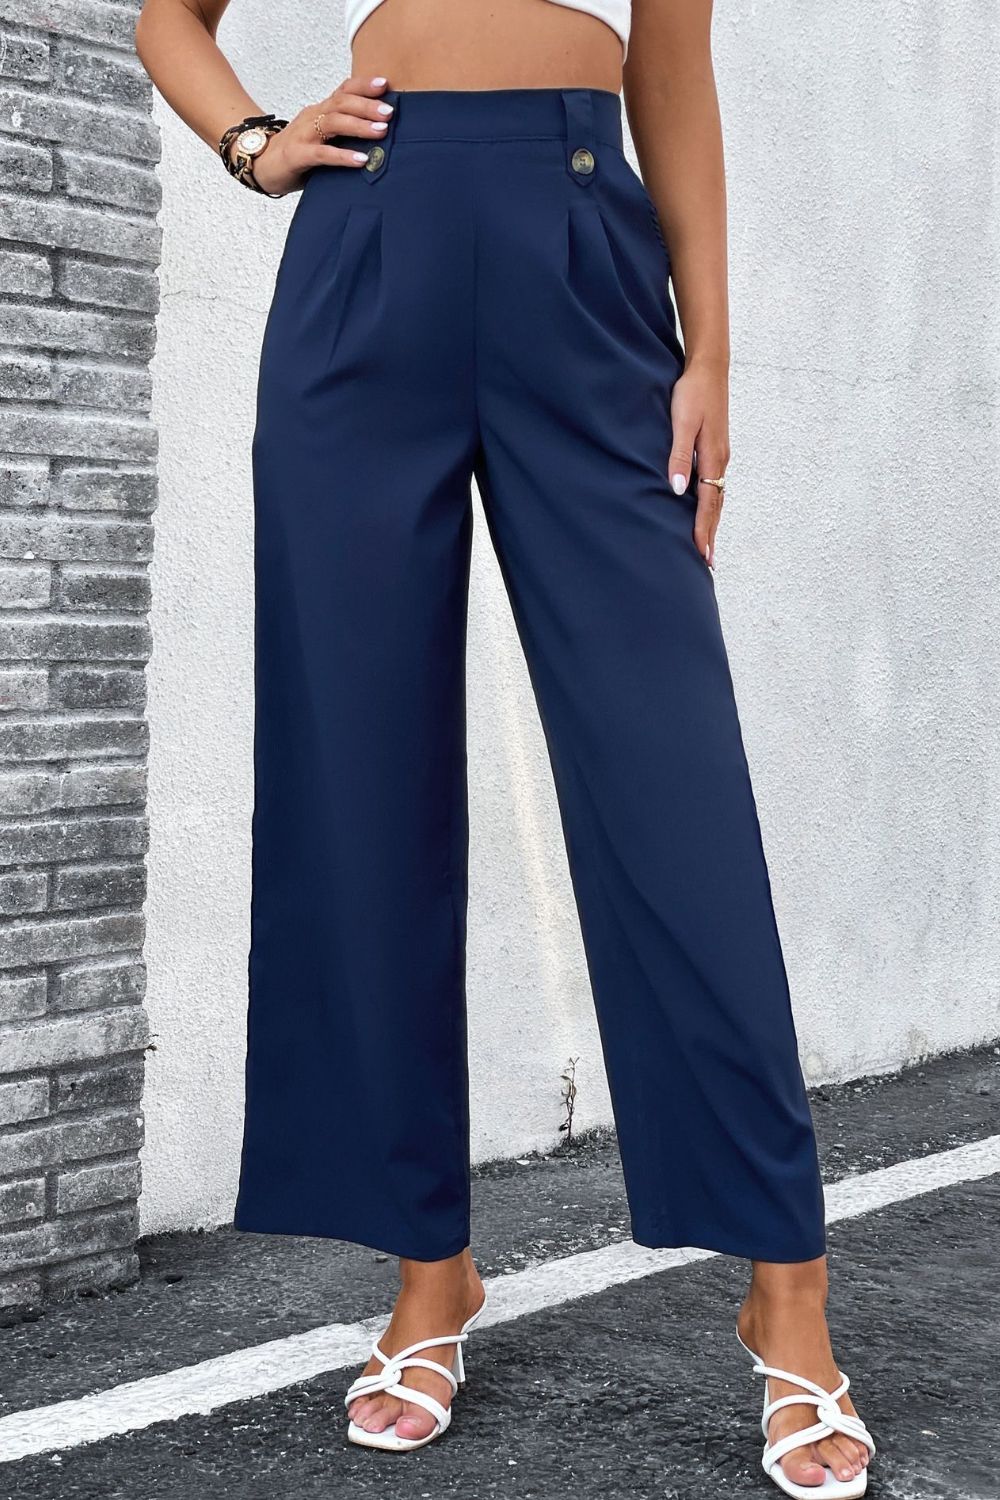 Women's Dress Pants  100% Made to measure - Sumissura